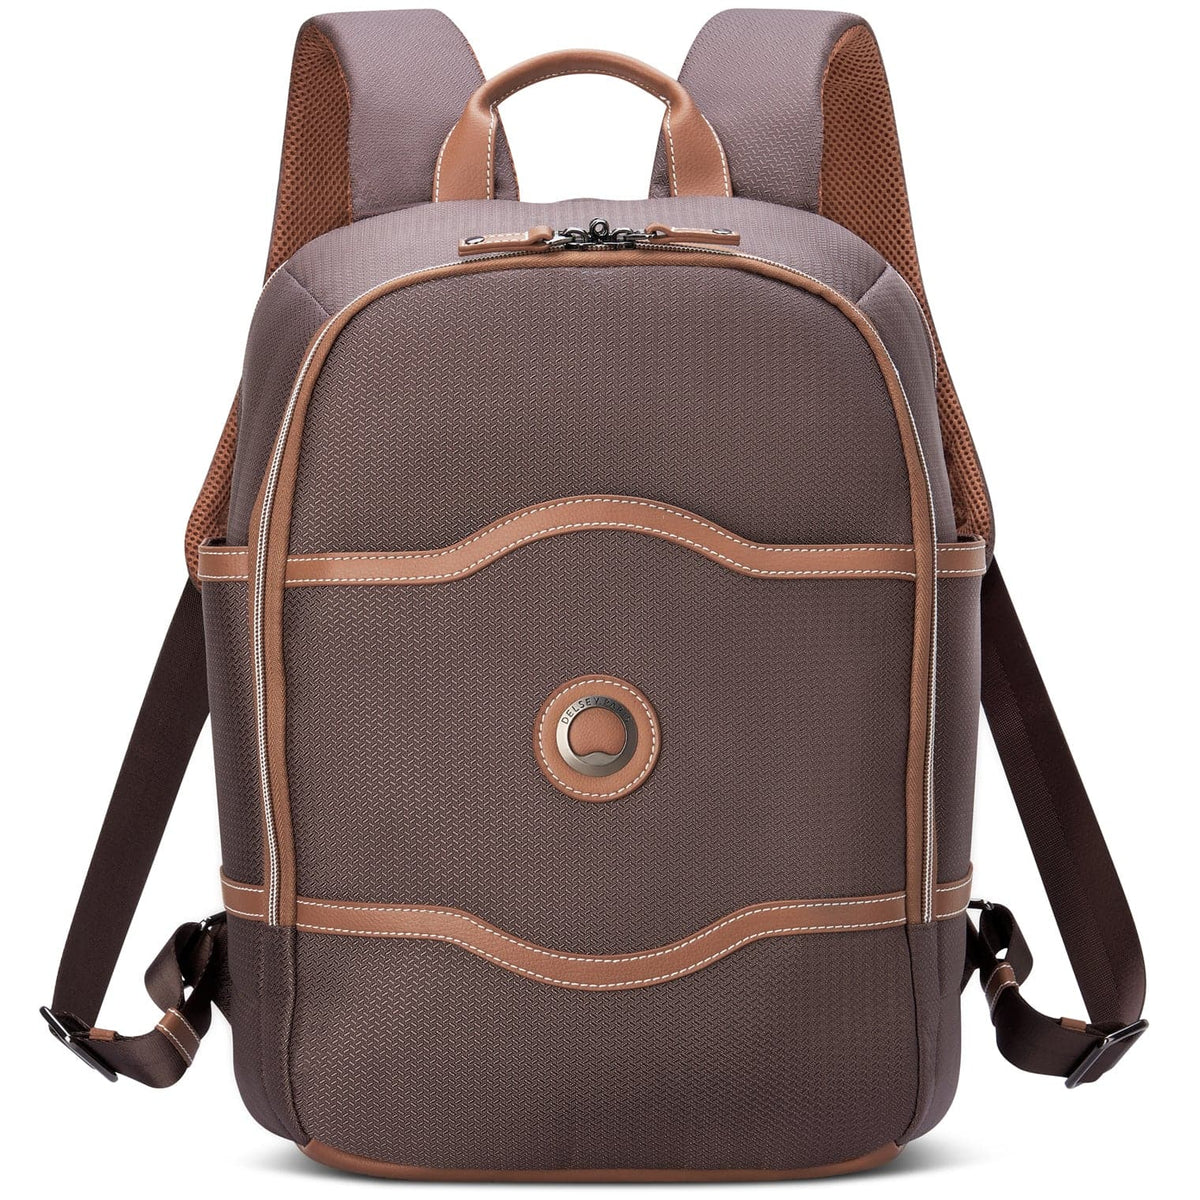 Delsey Chatelet Air 2.0 Backpack